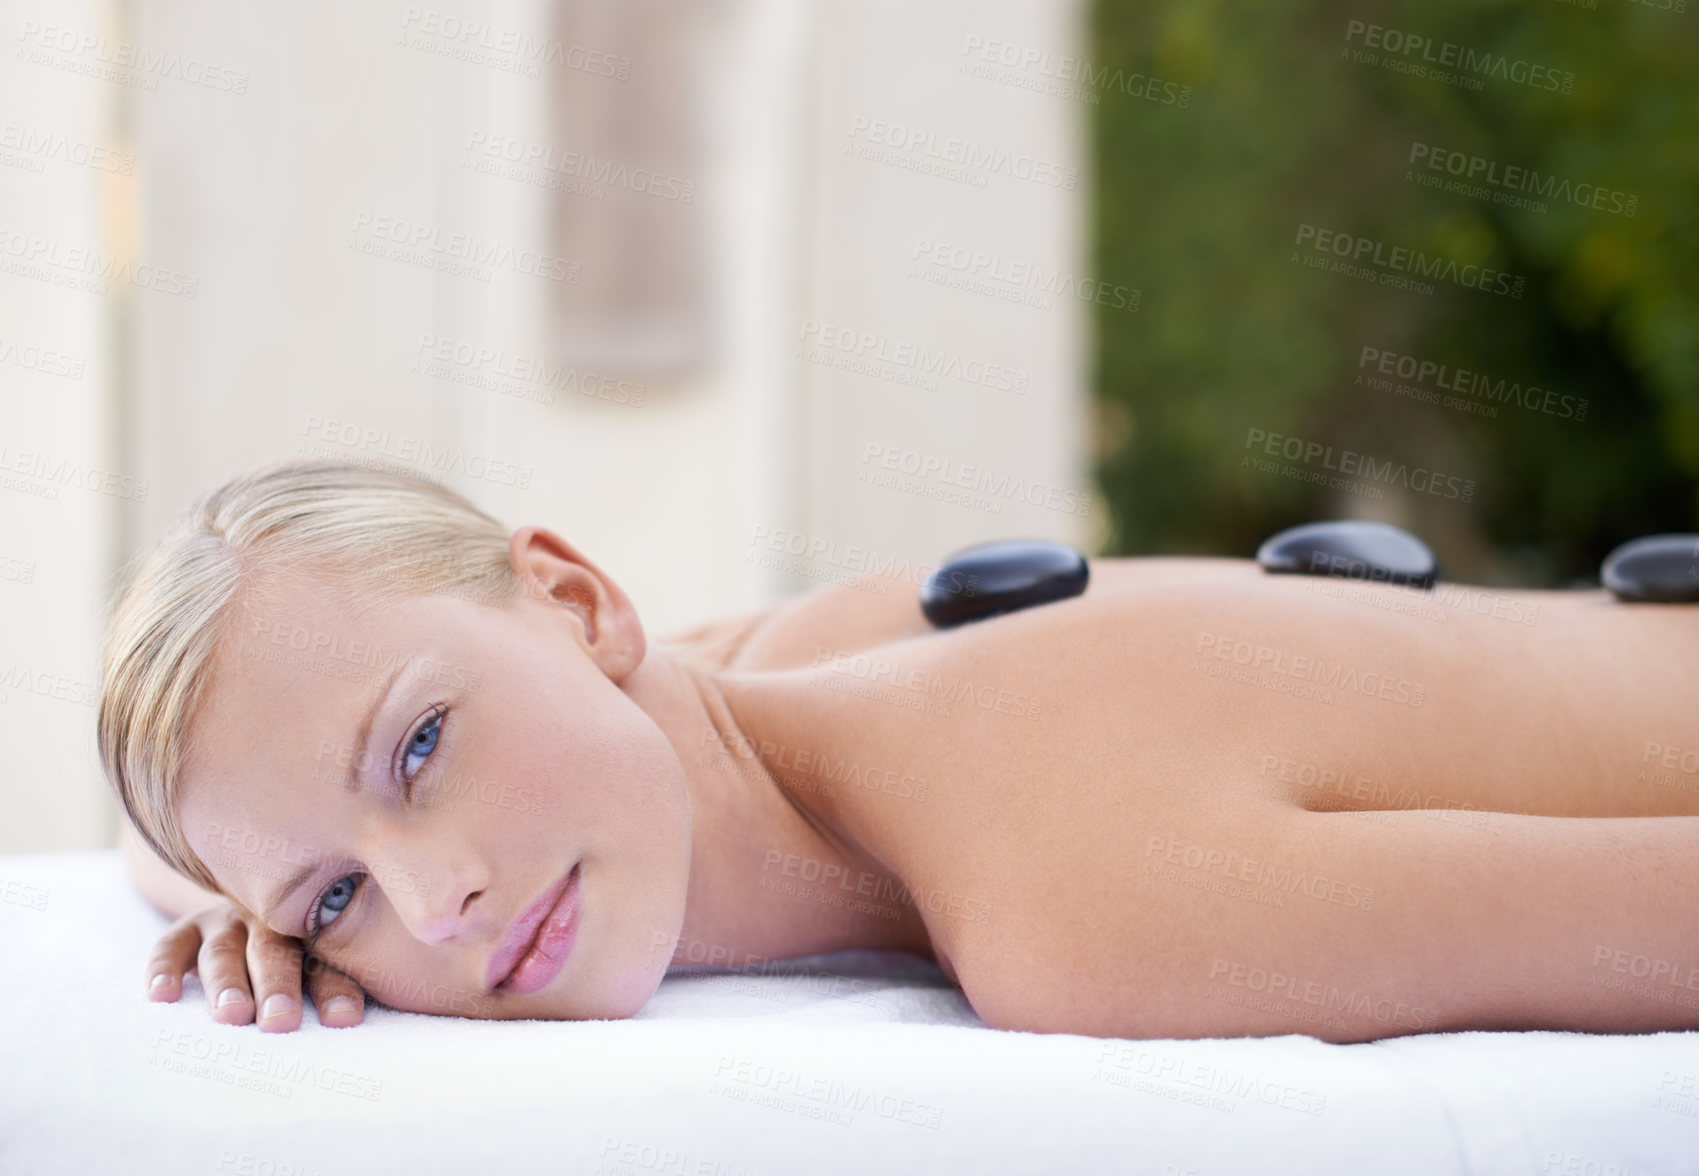 Buy stock photo Woman at spa, hot stone and portrait massage for healing, wellness and holistic treatment at luxury resort. Stress relief, zen and female person with rocks on back in self care or relax muscle heath